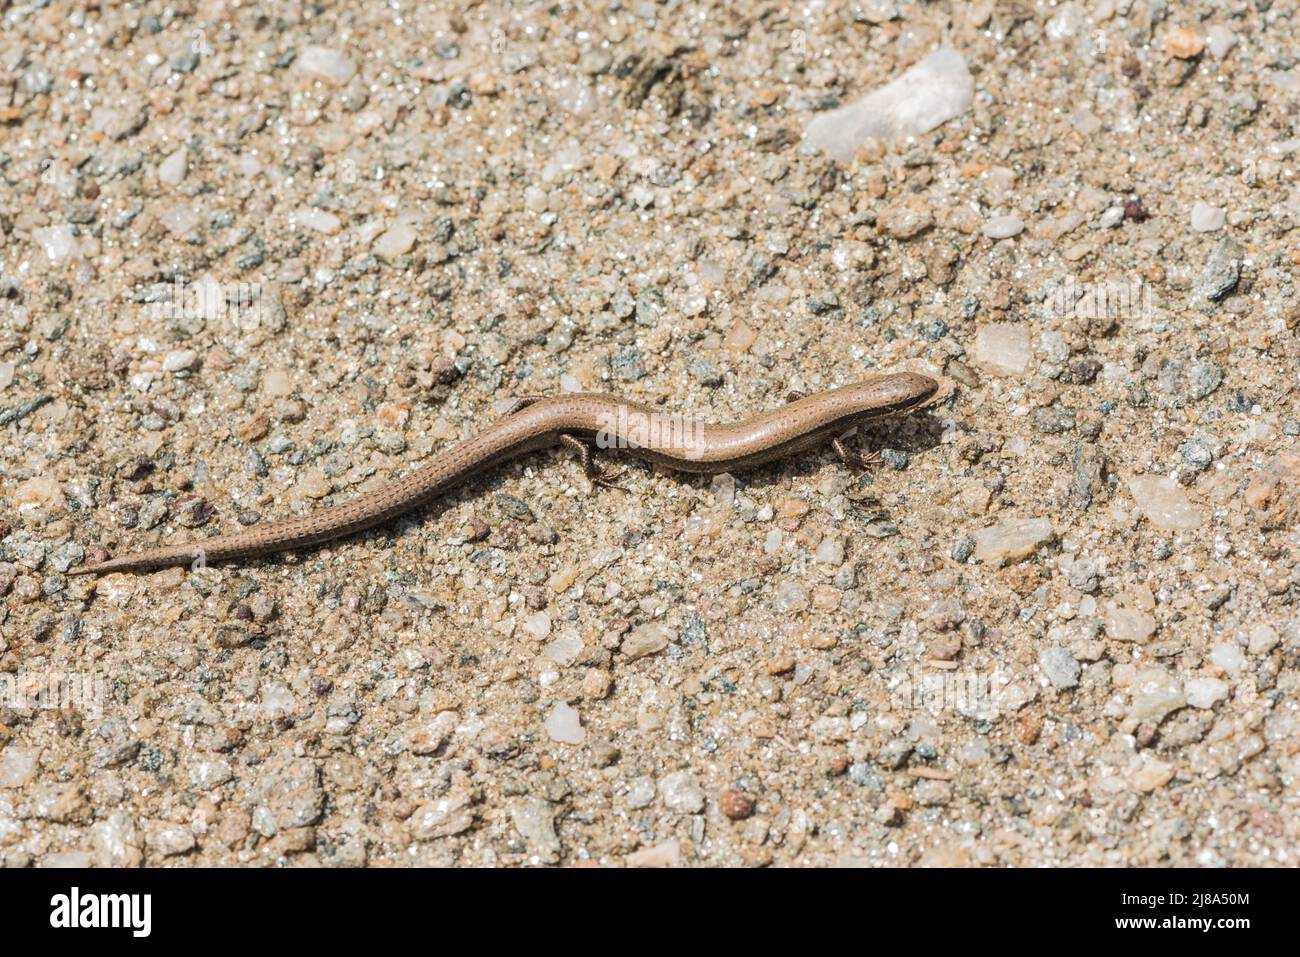 A Copper Skink (Ablepharus sp) Stock Photo